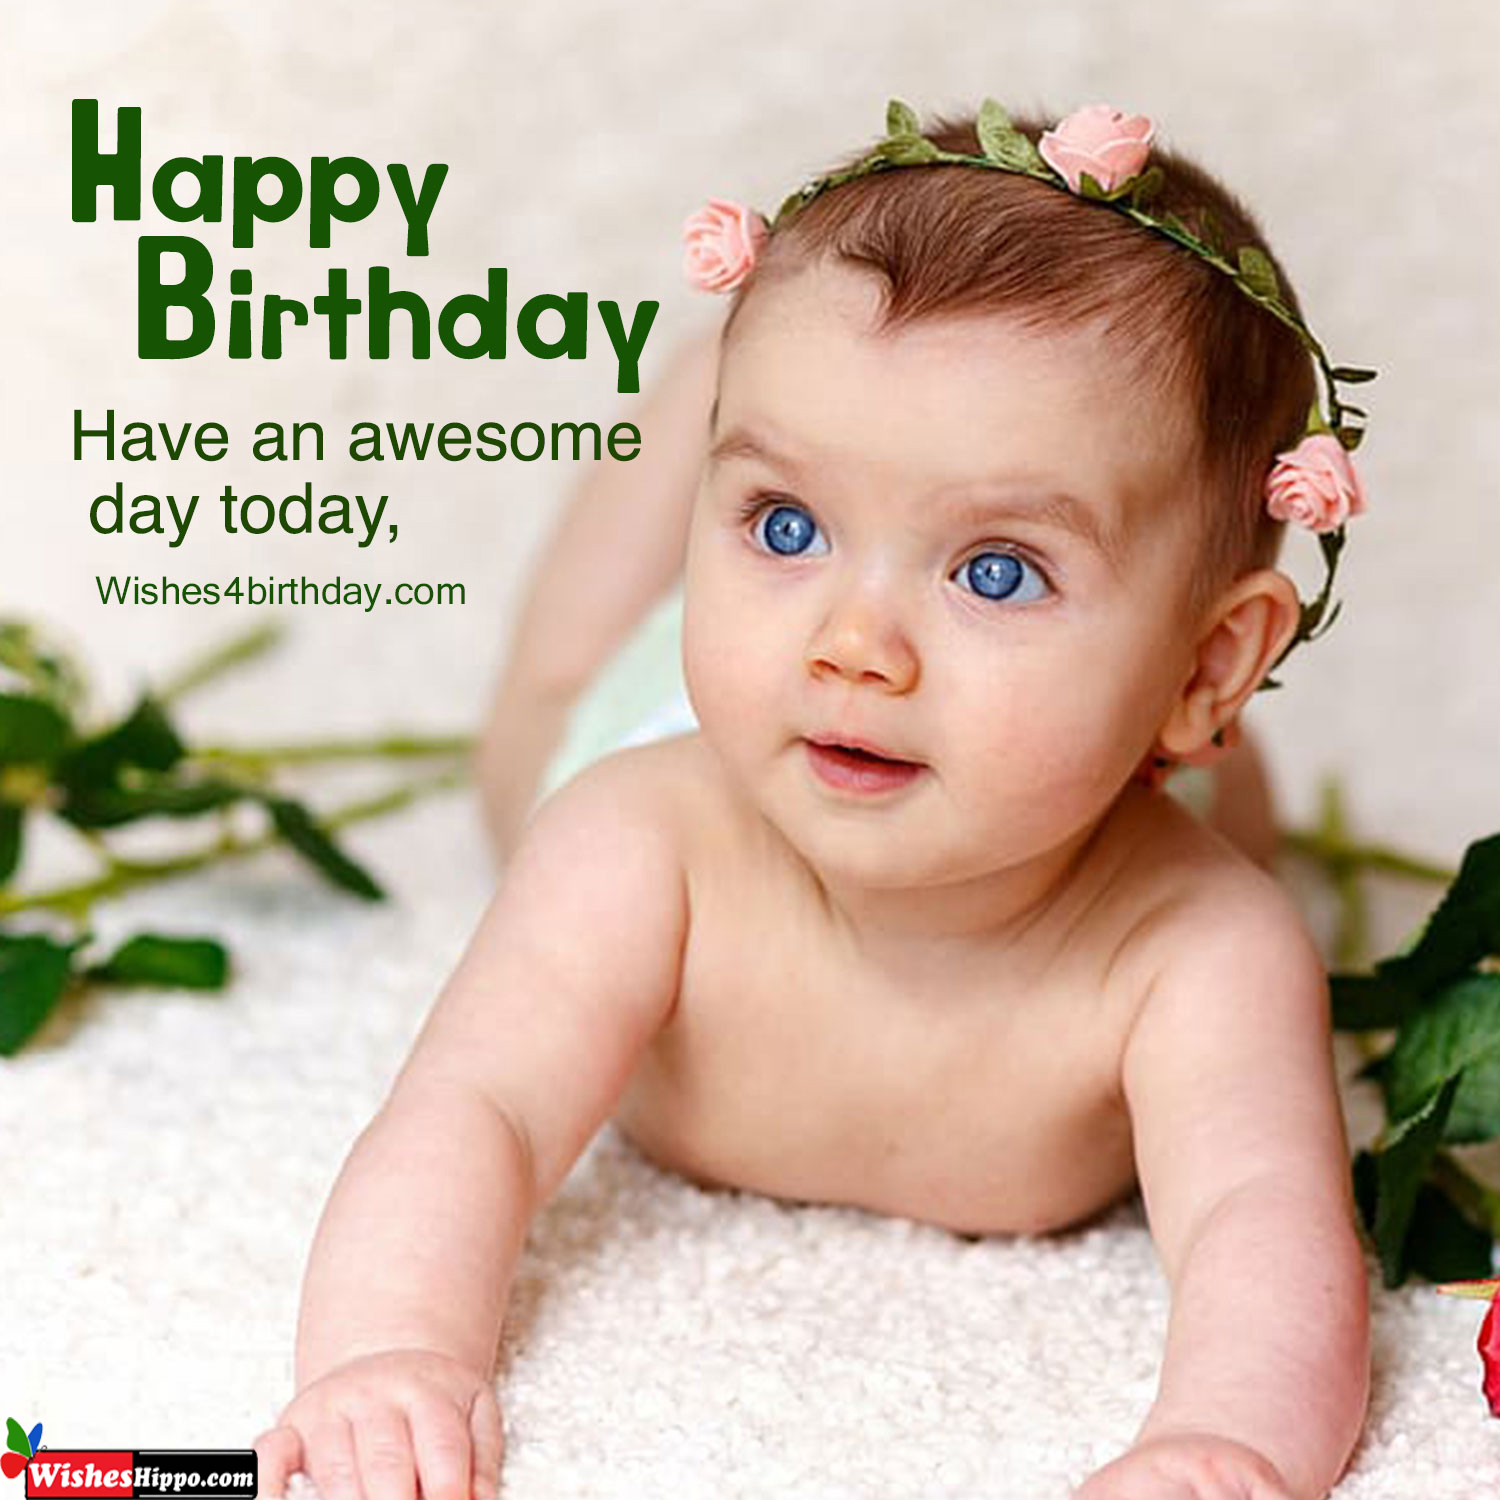 Birthday Wishes for a Baby Girl Image